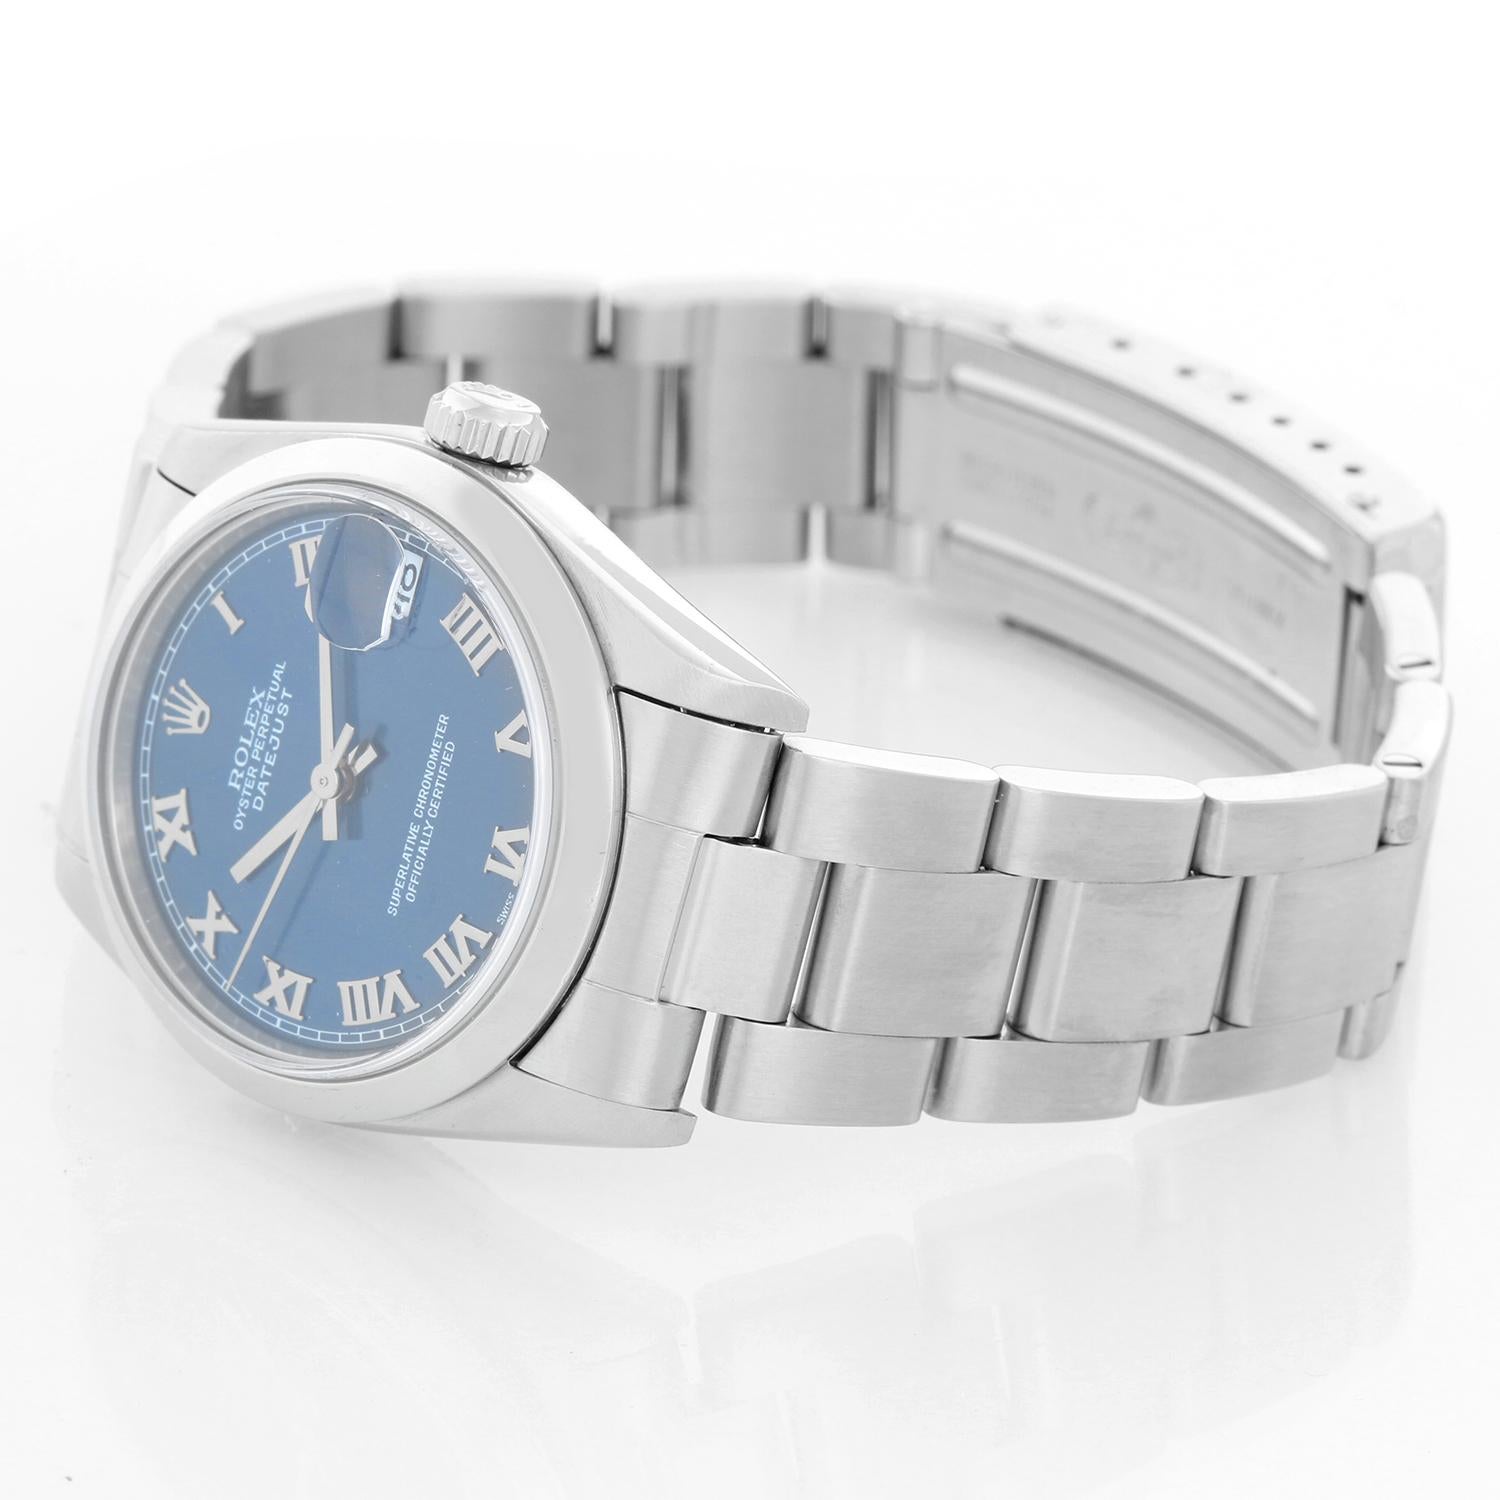 Rolex Stainless Steel Datejust Midsize Watch 78240 - Automatic winding. Stainless steel case (31mm) with smooth bezel. Blue dial with Roman numerals. Stainless steel Oyster bracelet; fits up to a 6 3/4 inch wrist . Pre-owned with Rolex box and